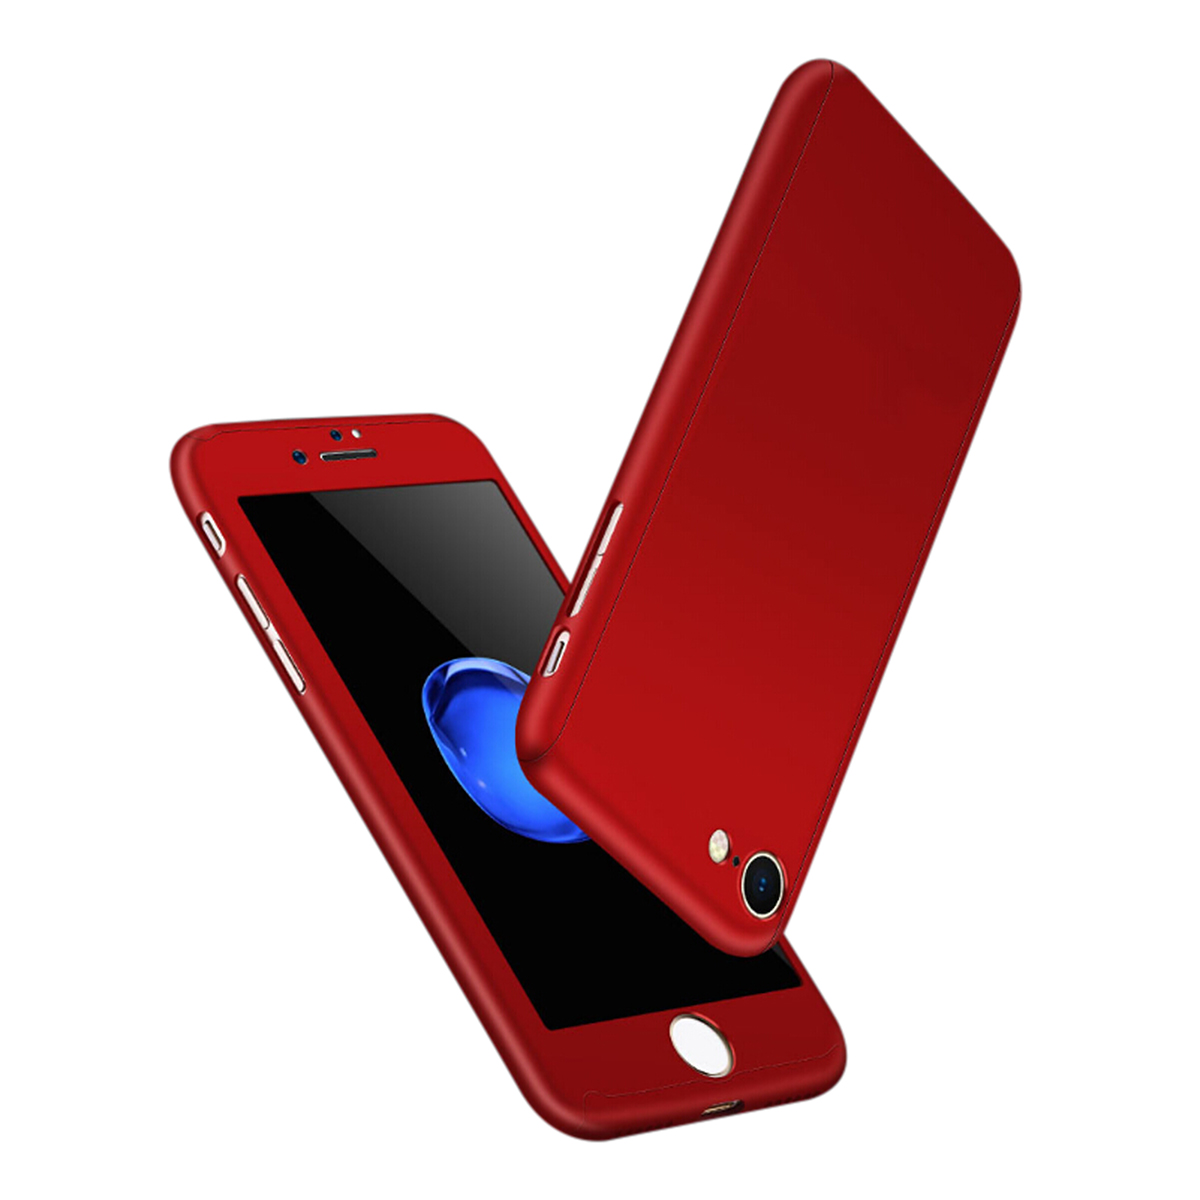 360Â°Degree Frosted Full Body Coverage Protective Case Cover for iPhone 6 Plus - Red